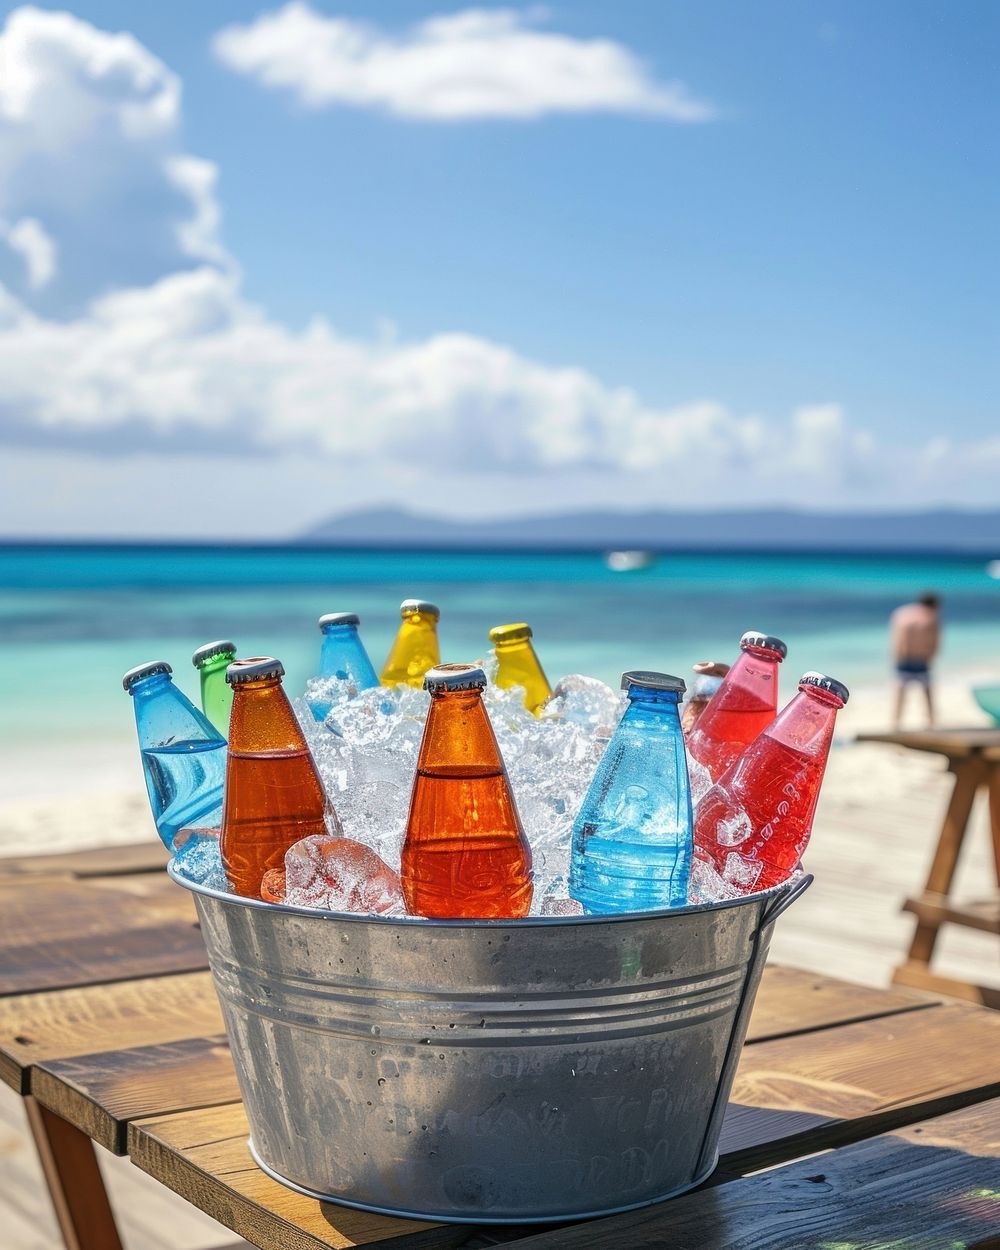 Assorted soda bottles in a metal bucket full of ice put on wood table against beach view summer outdoors vacation.